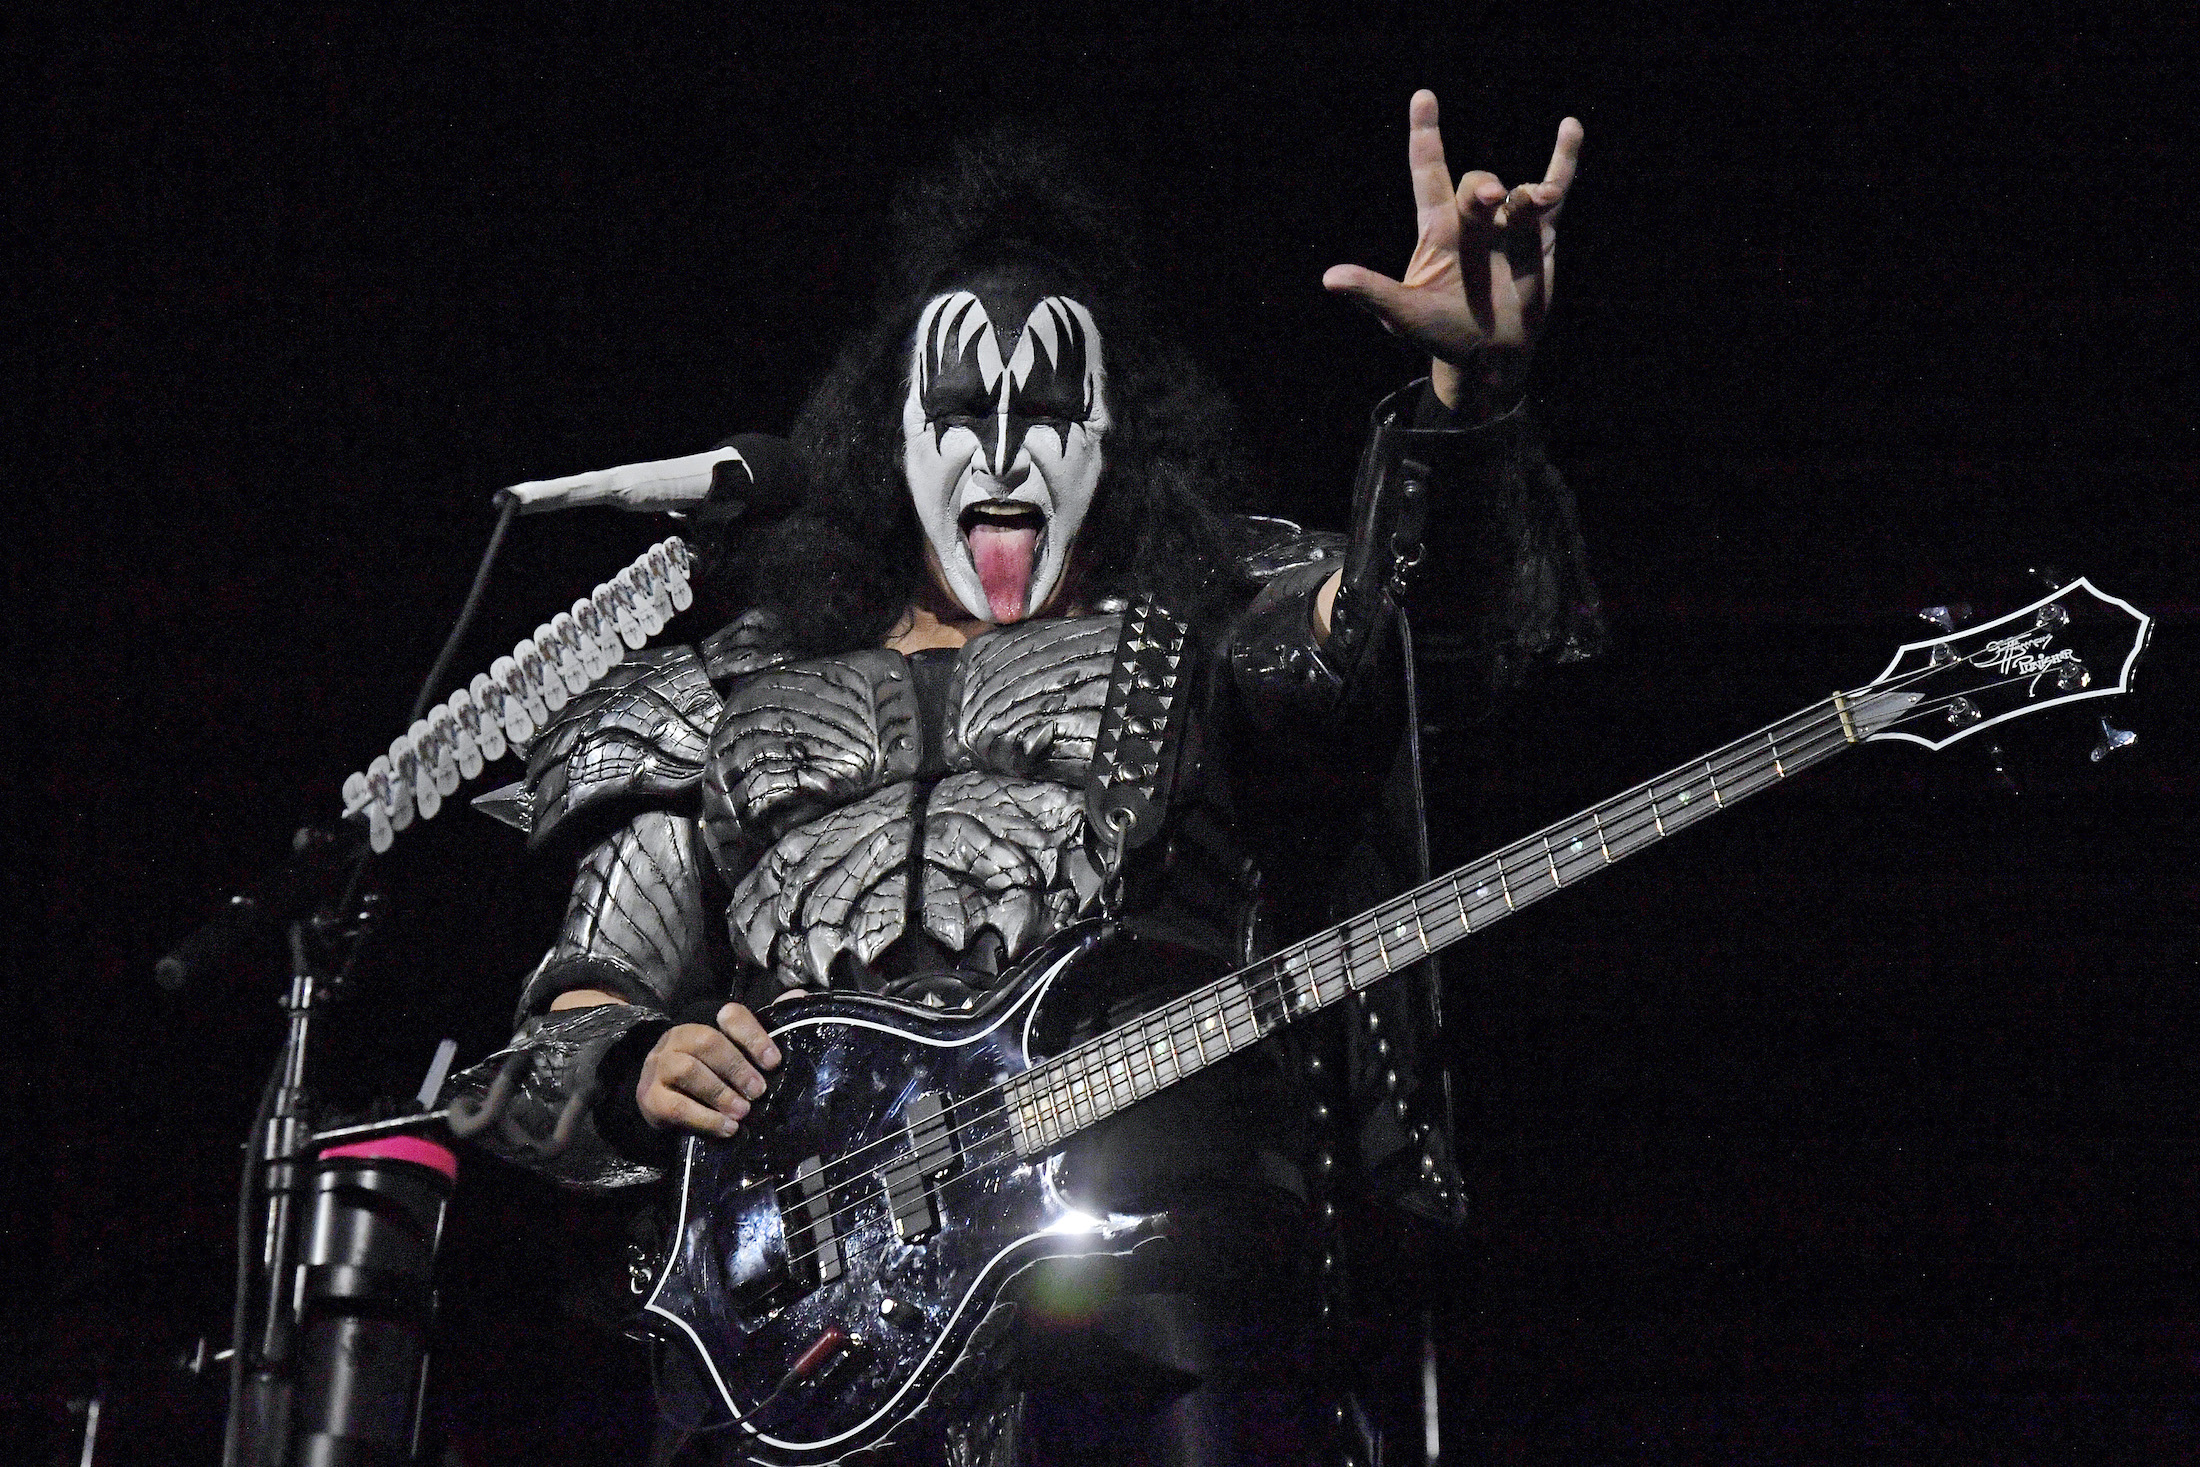 Gene Simmons performs with Kiss at the Tribeca film festival in New York City